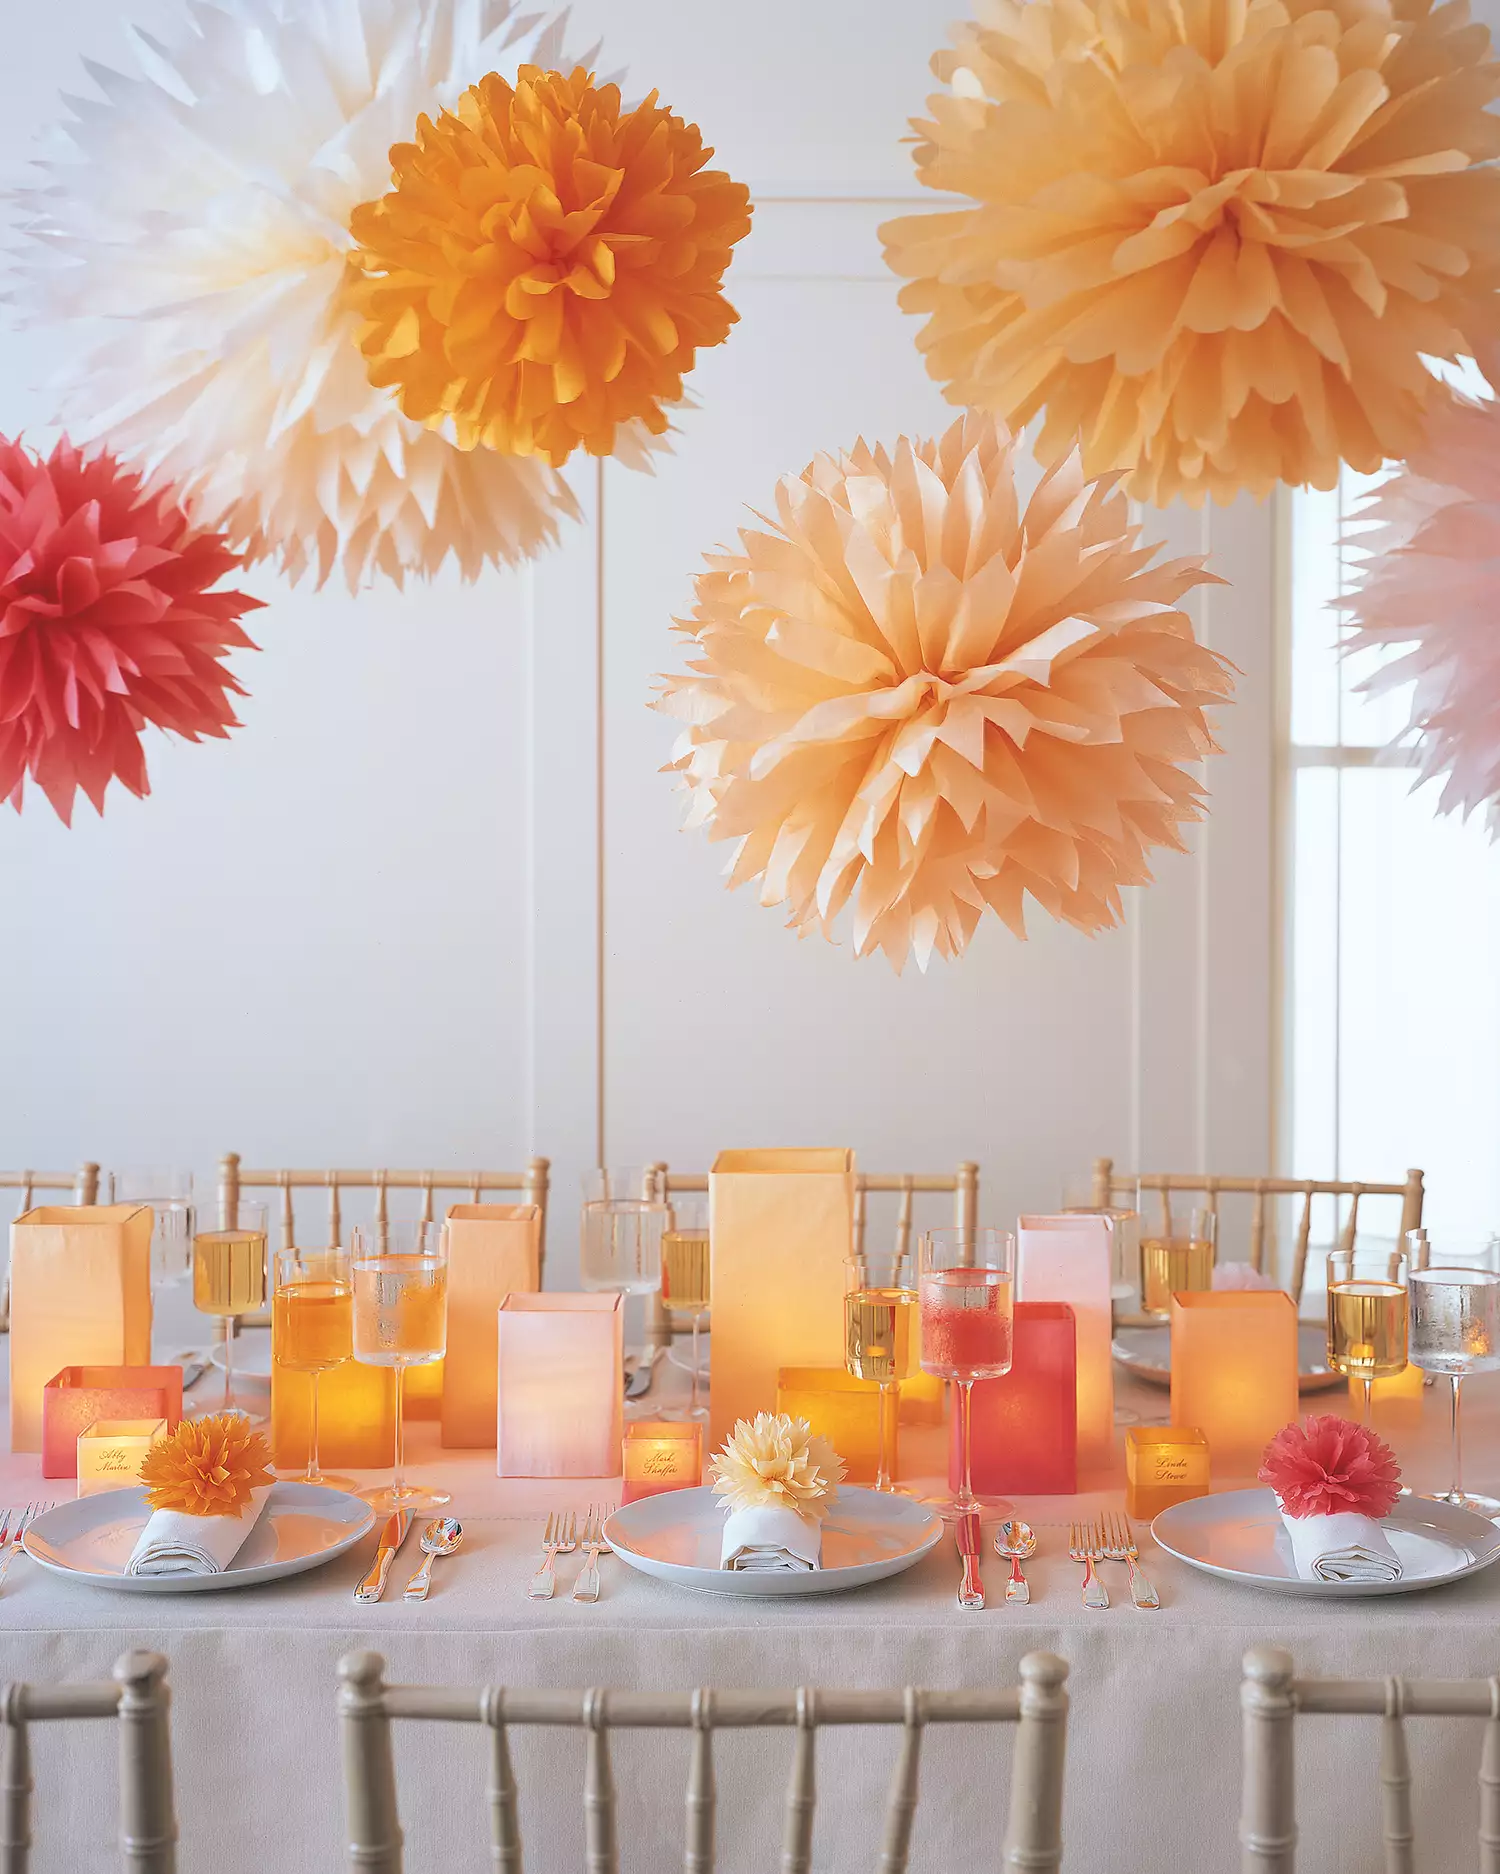 10 of Our Most Beautiful Tissue and Crepe Paper Crafts